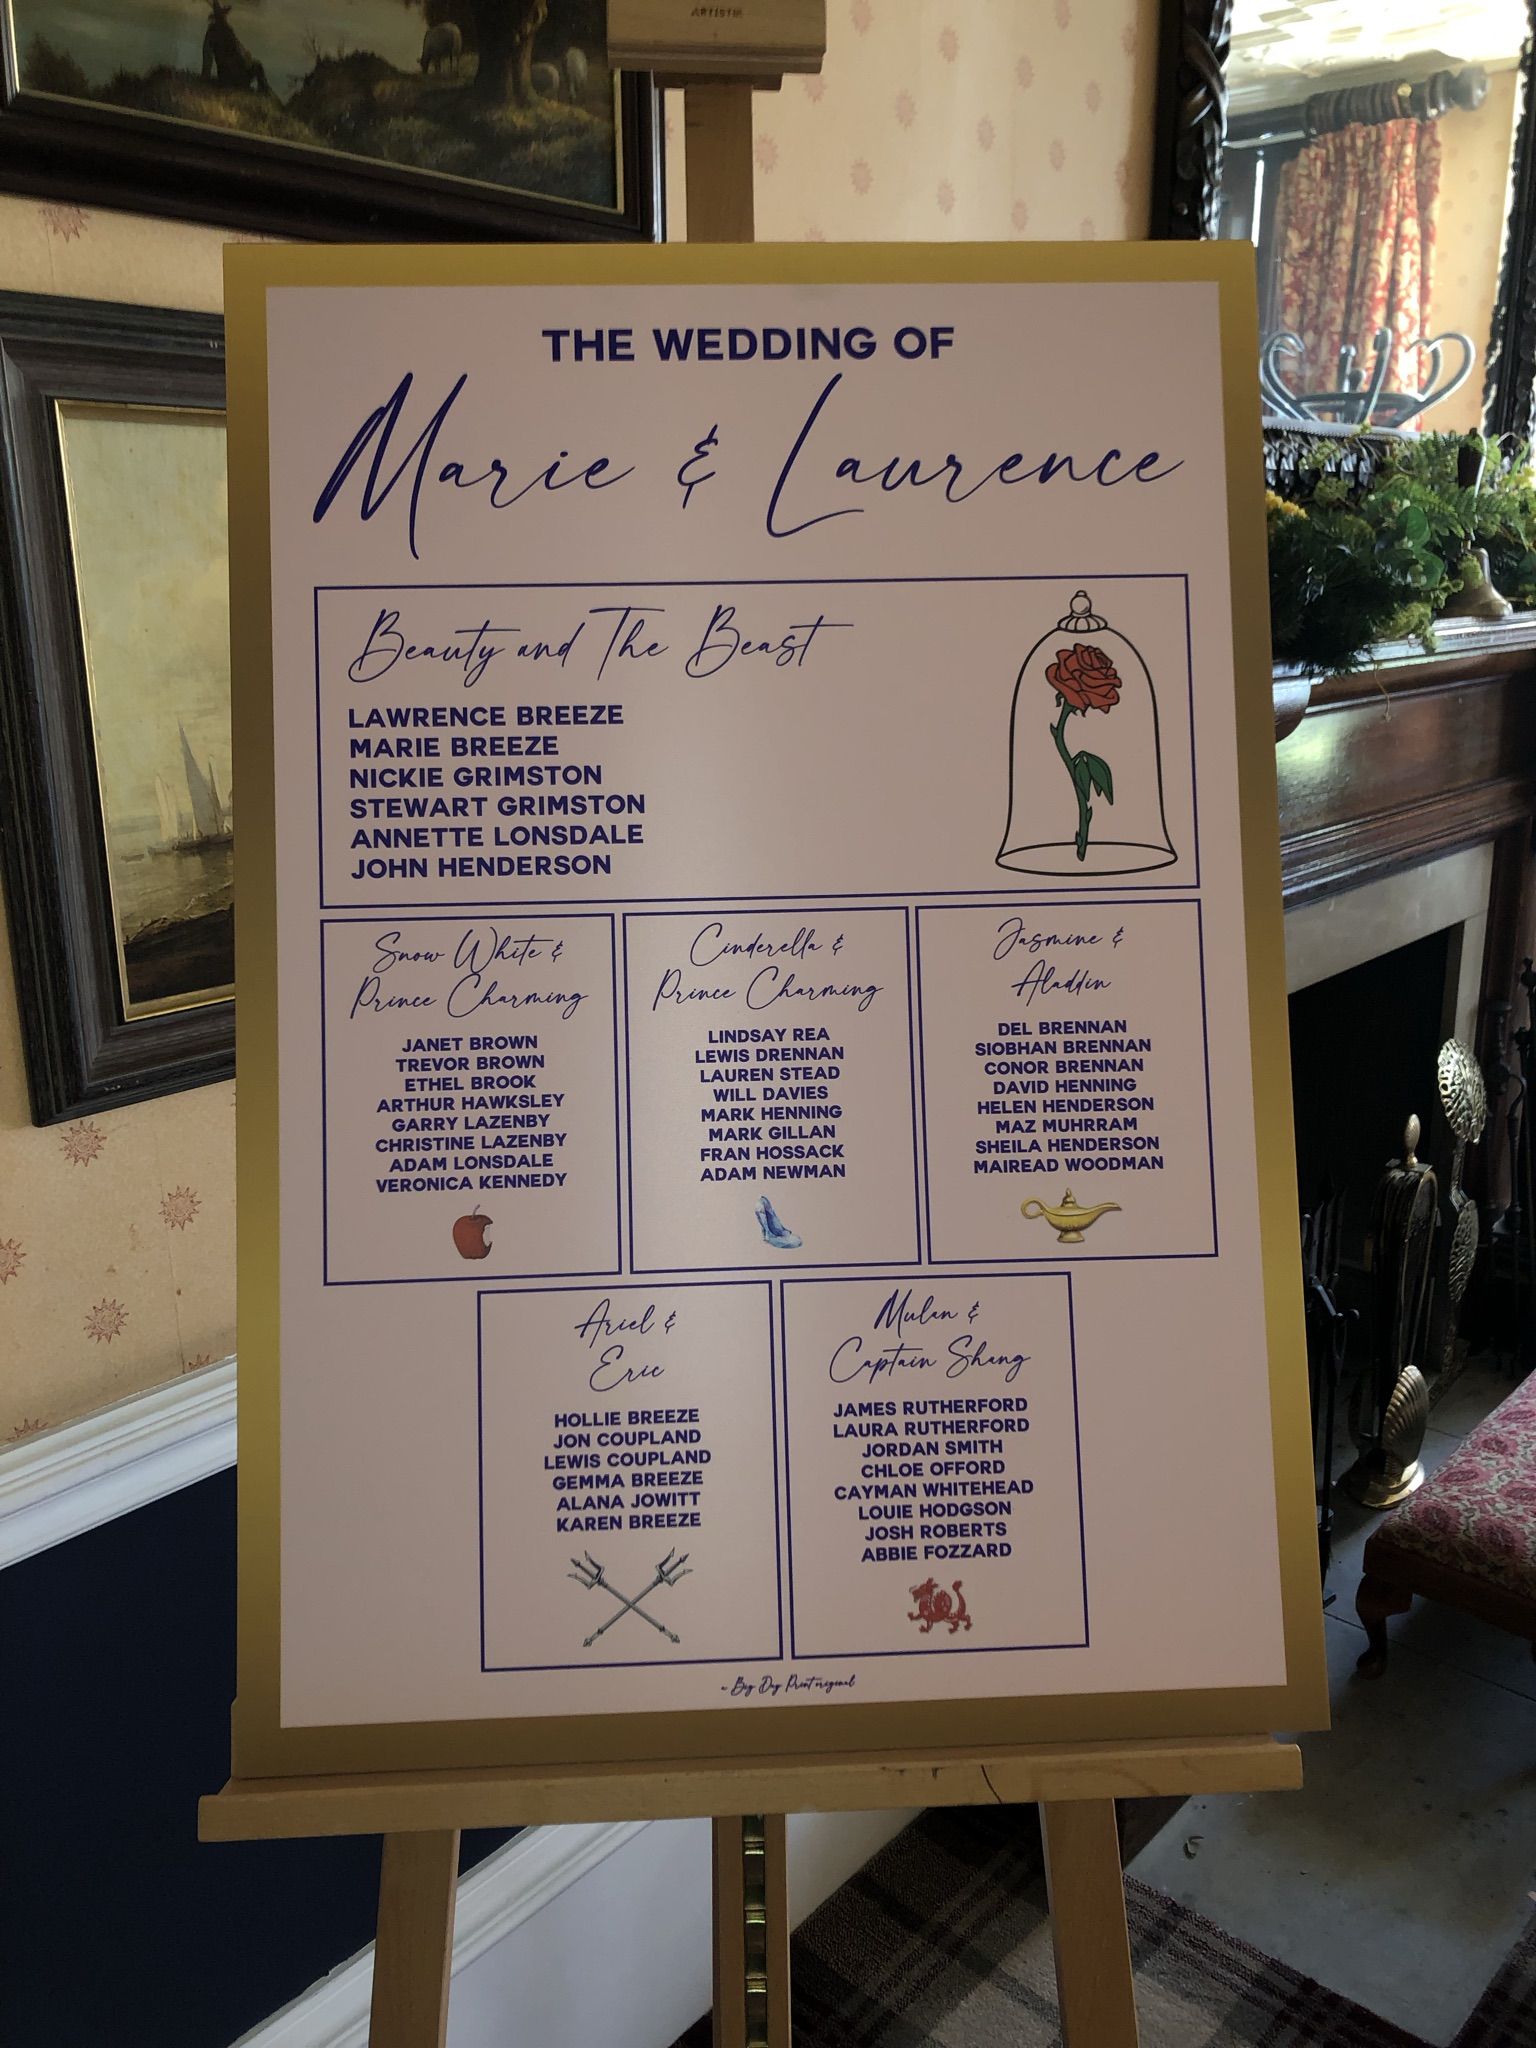 a wedding seating chart on a easel in a room.